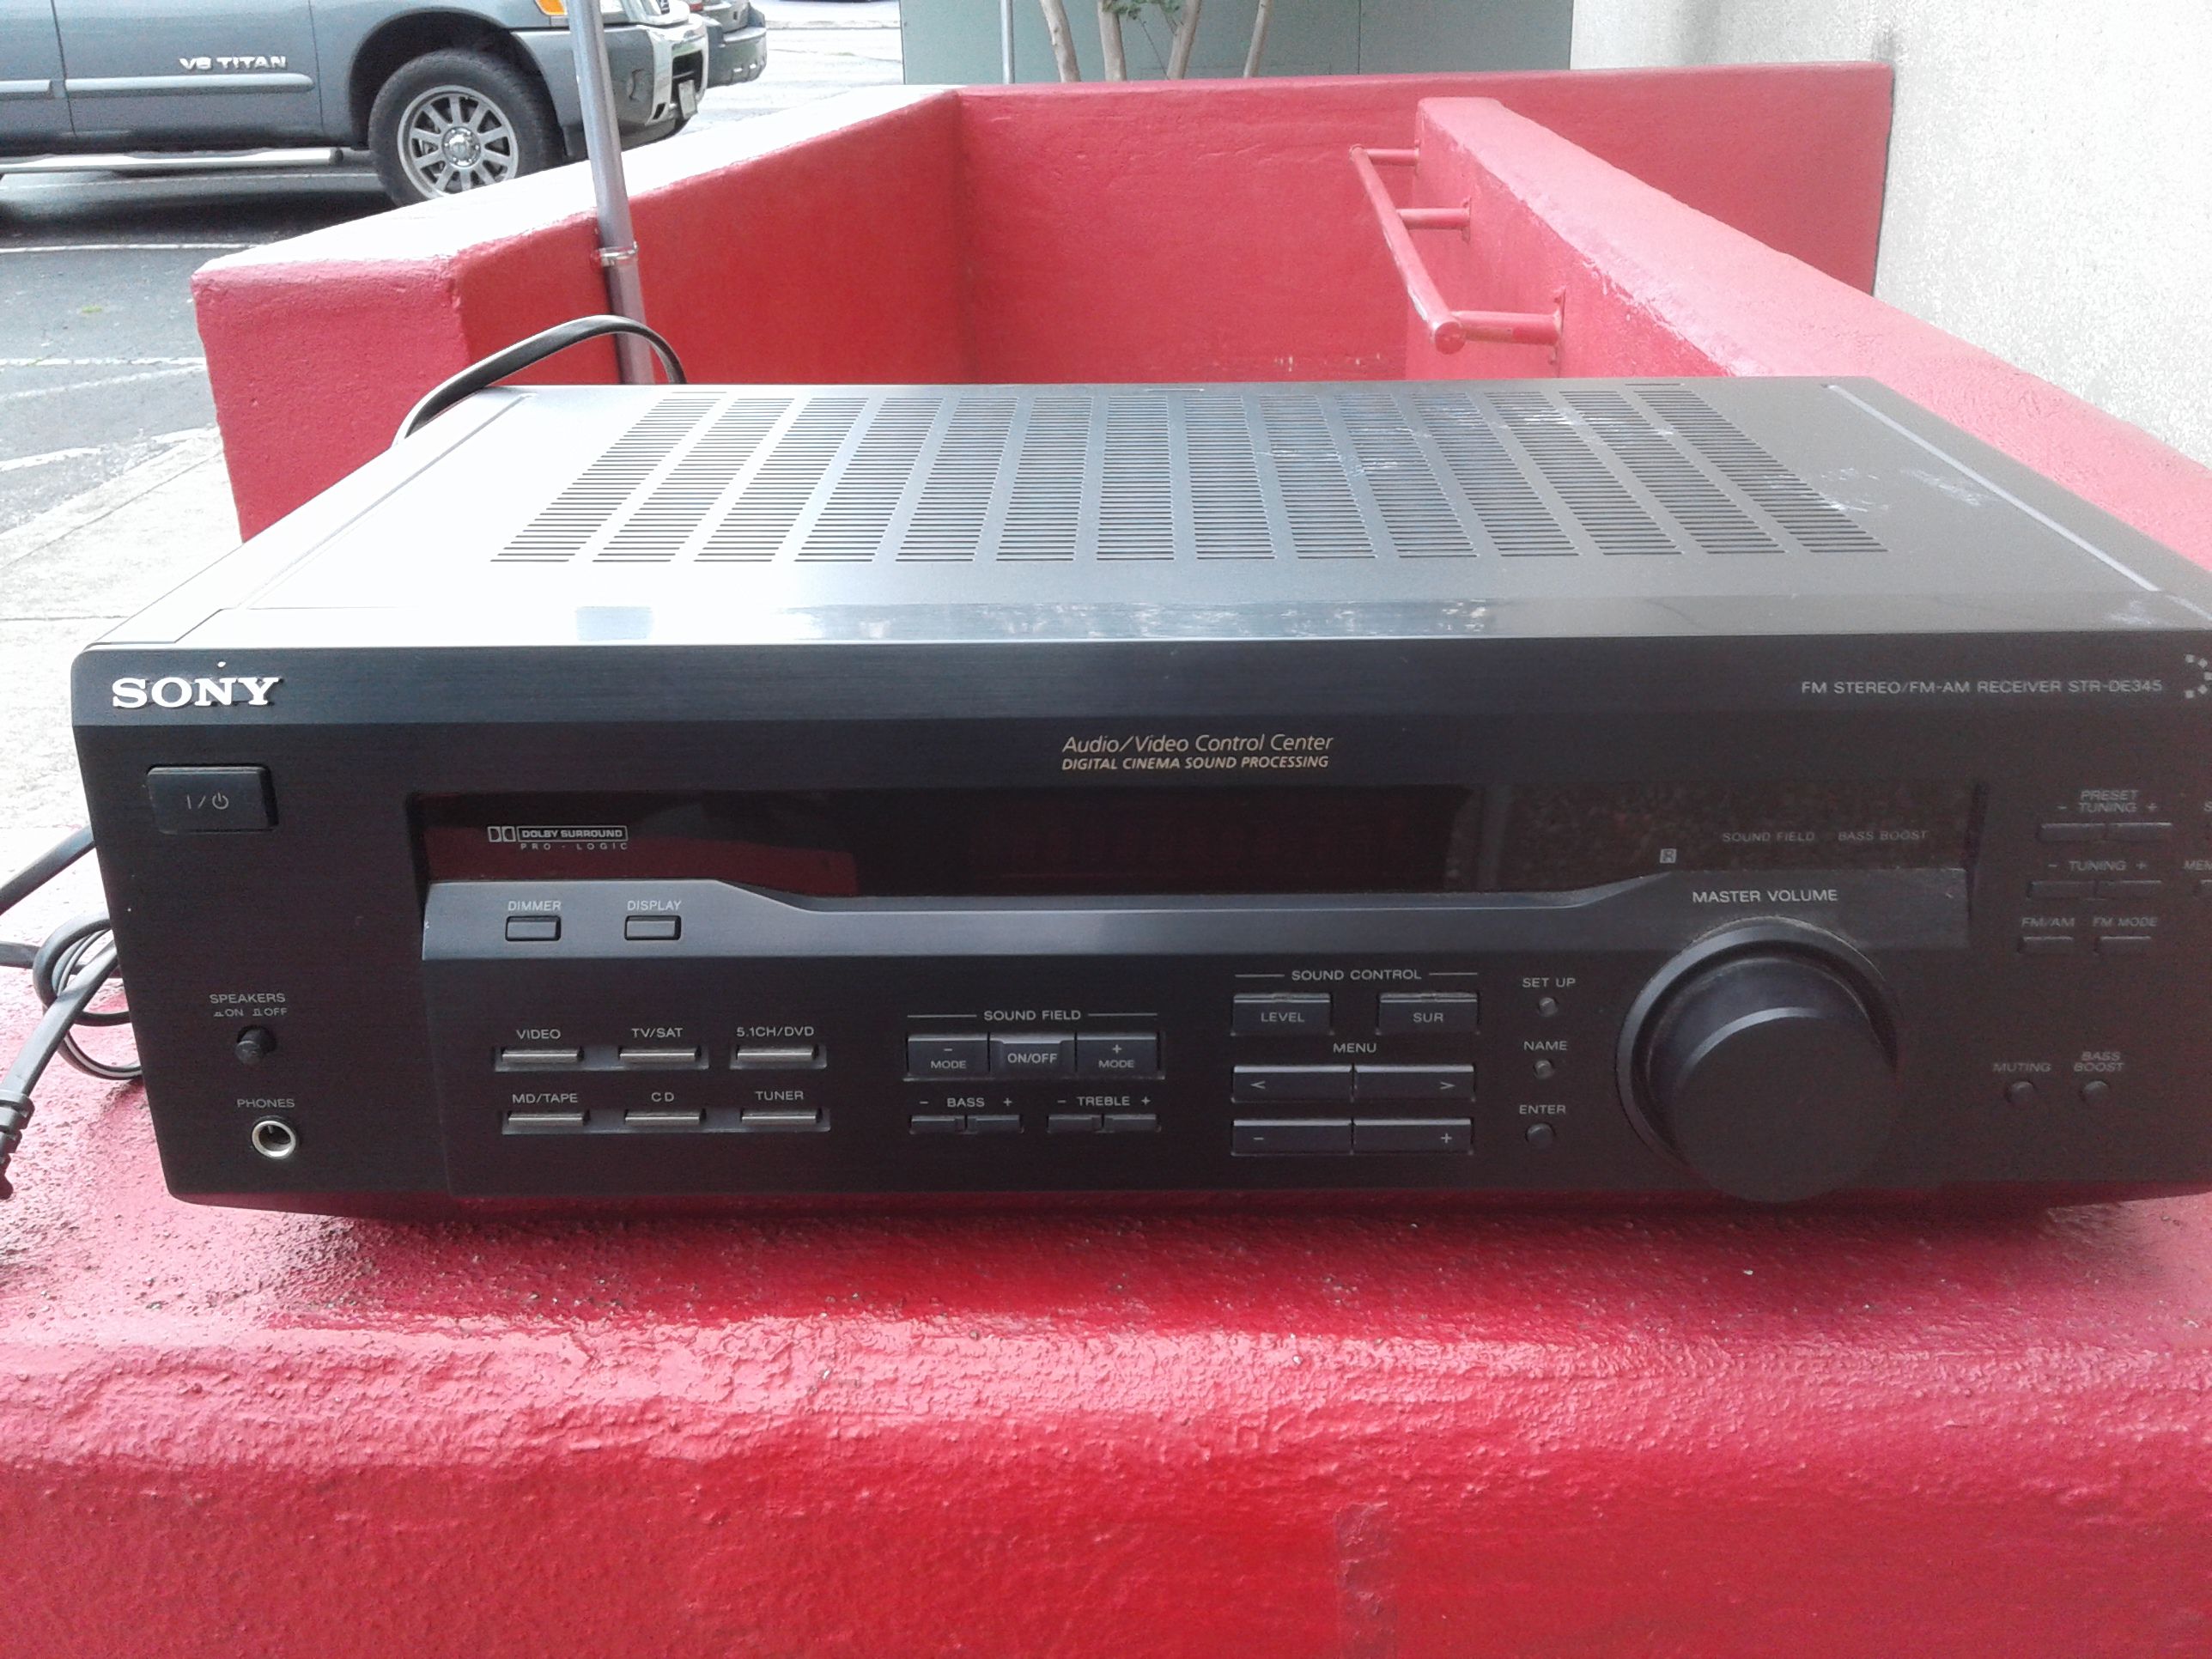 SONY STR-DE345 Stereo Receiver 19 years old and fresh from the farm